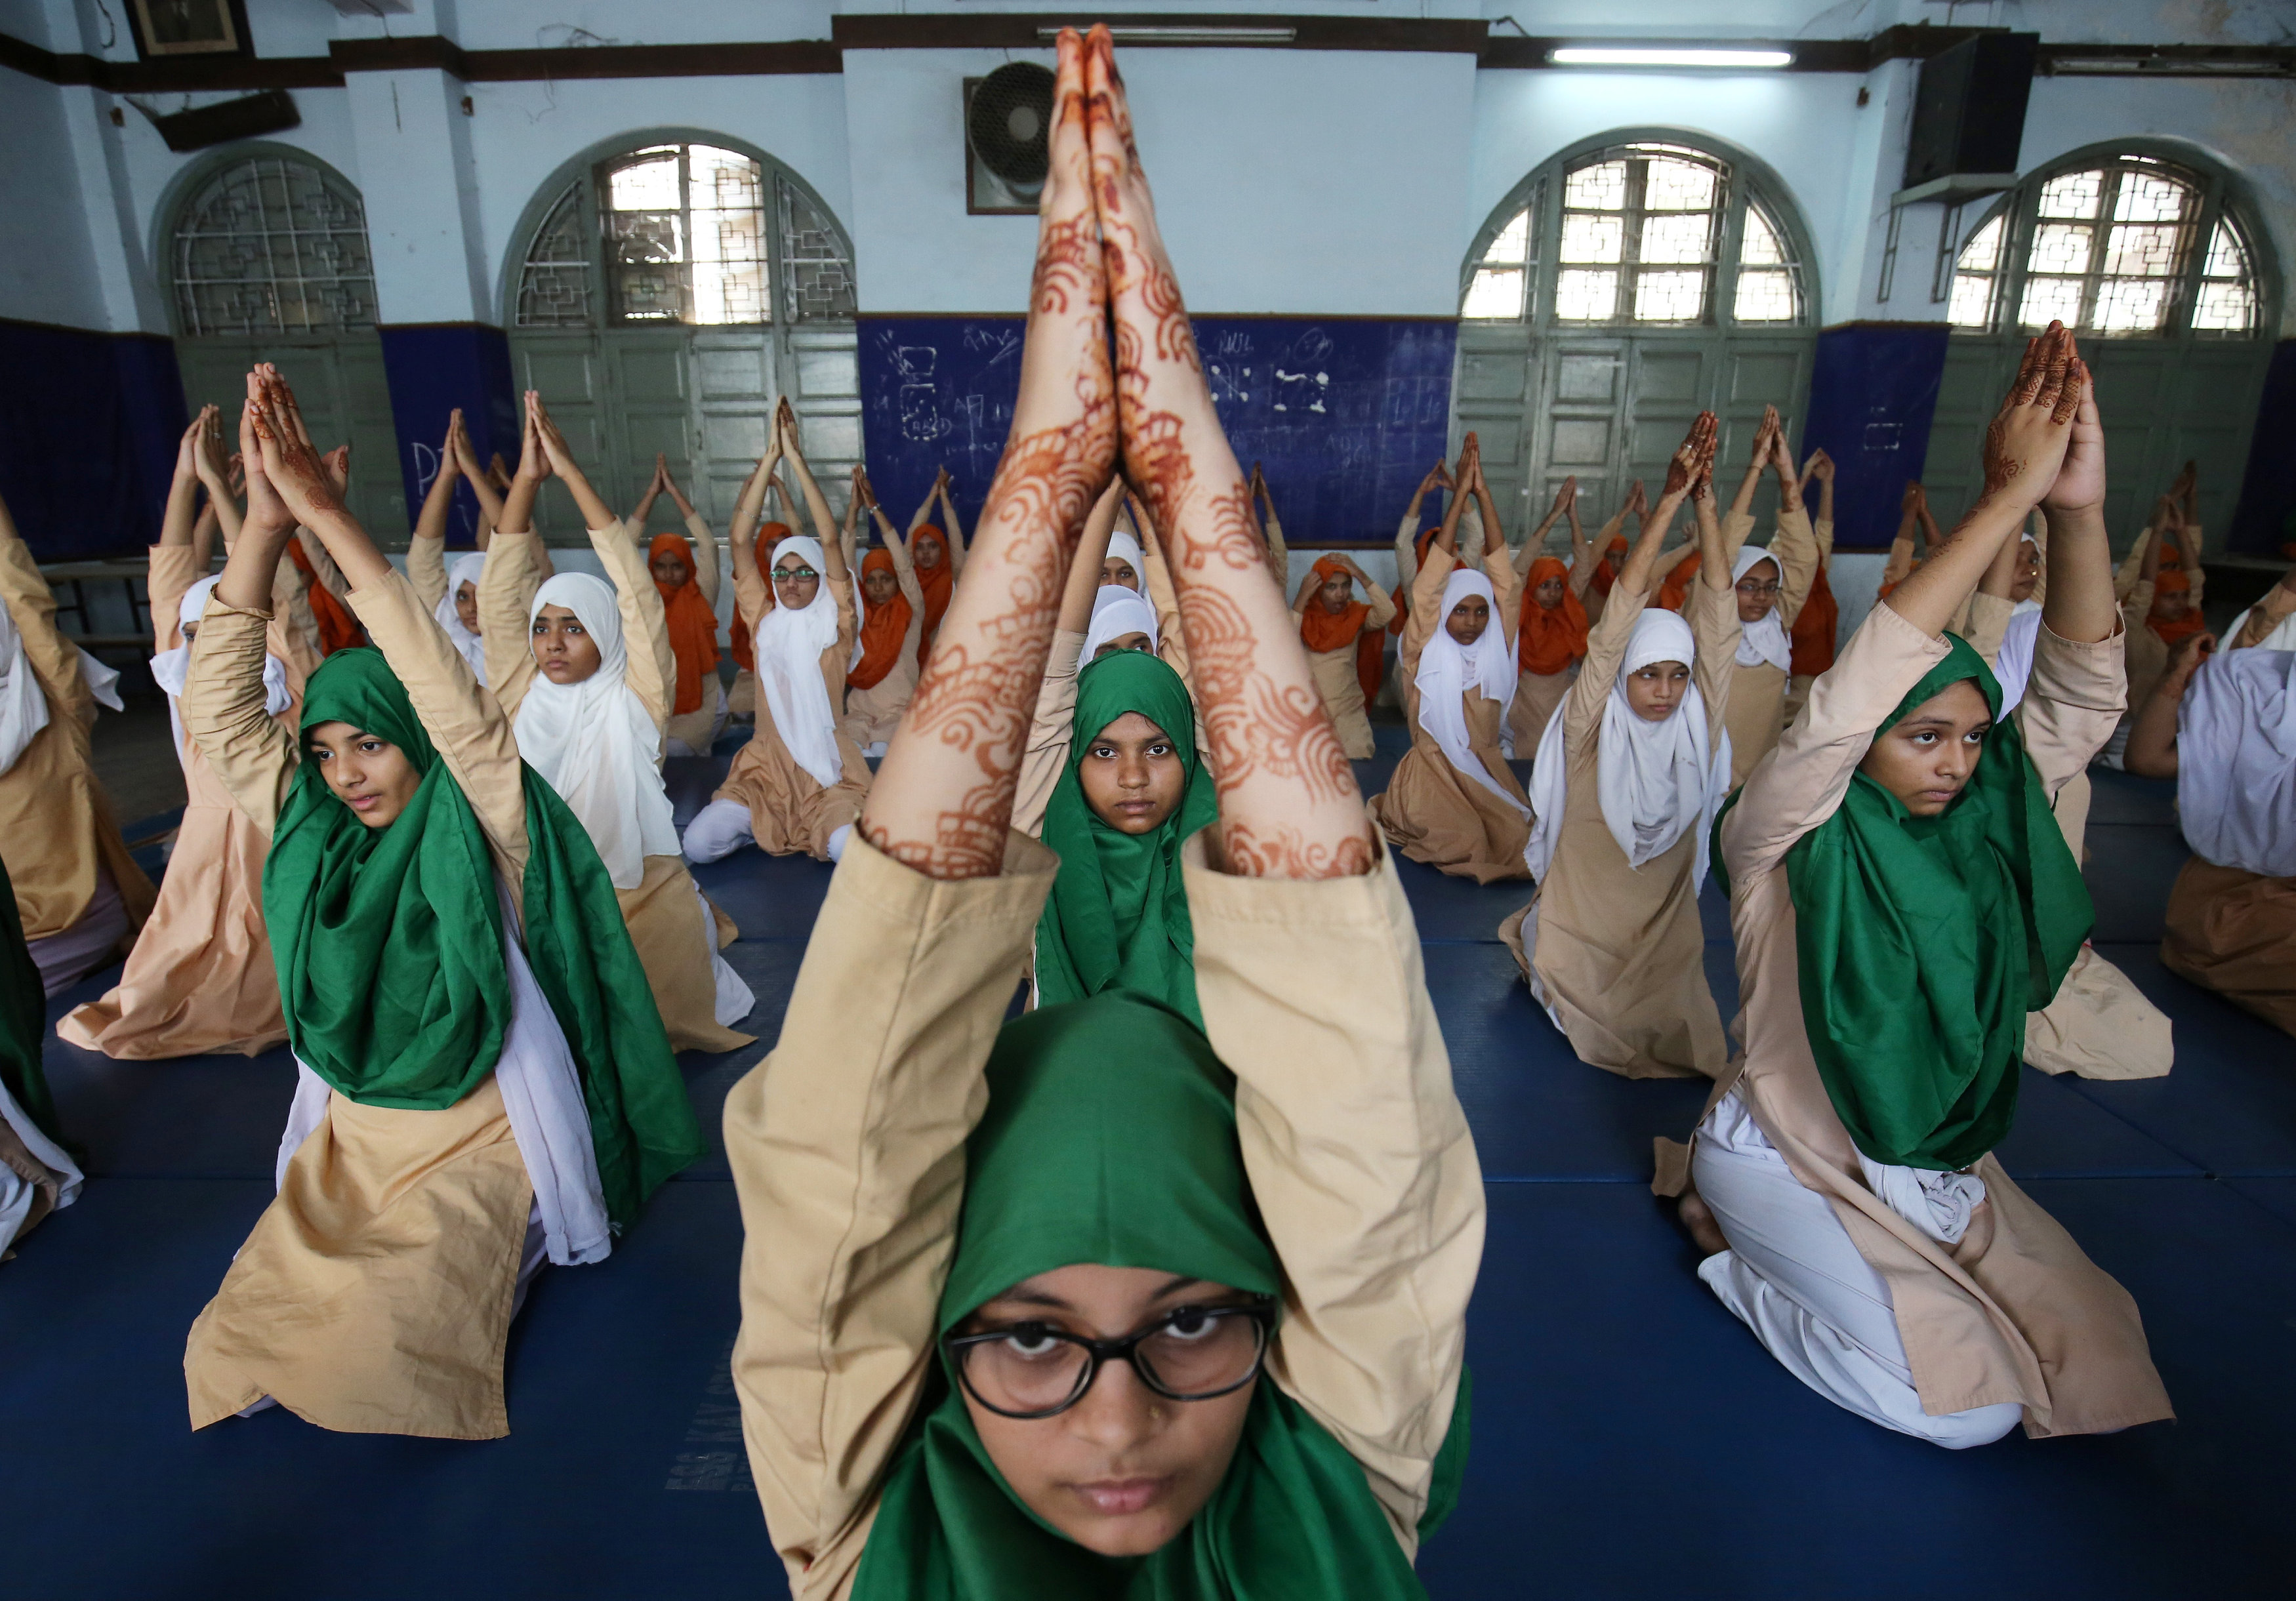 2018-06-19T084513Z_549400045_RC1A0A395770_RTRMADP_3_YOGA-DAY-INDIA